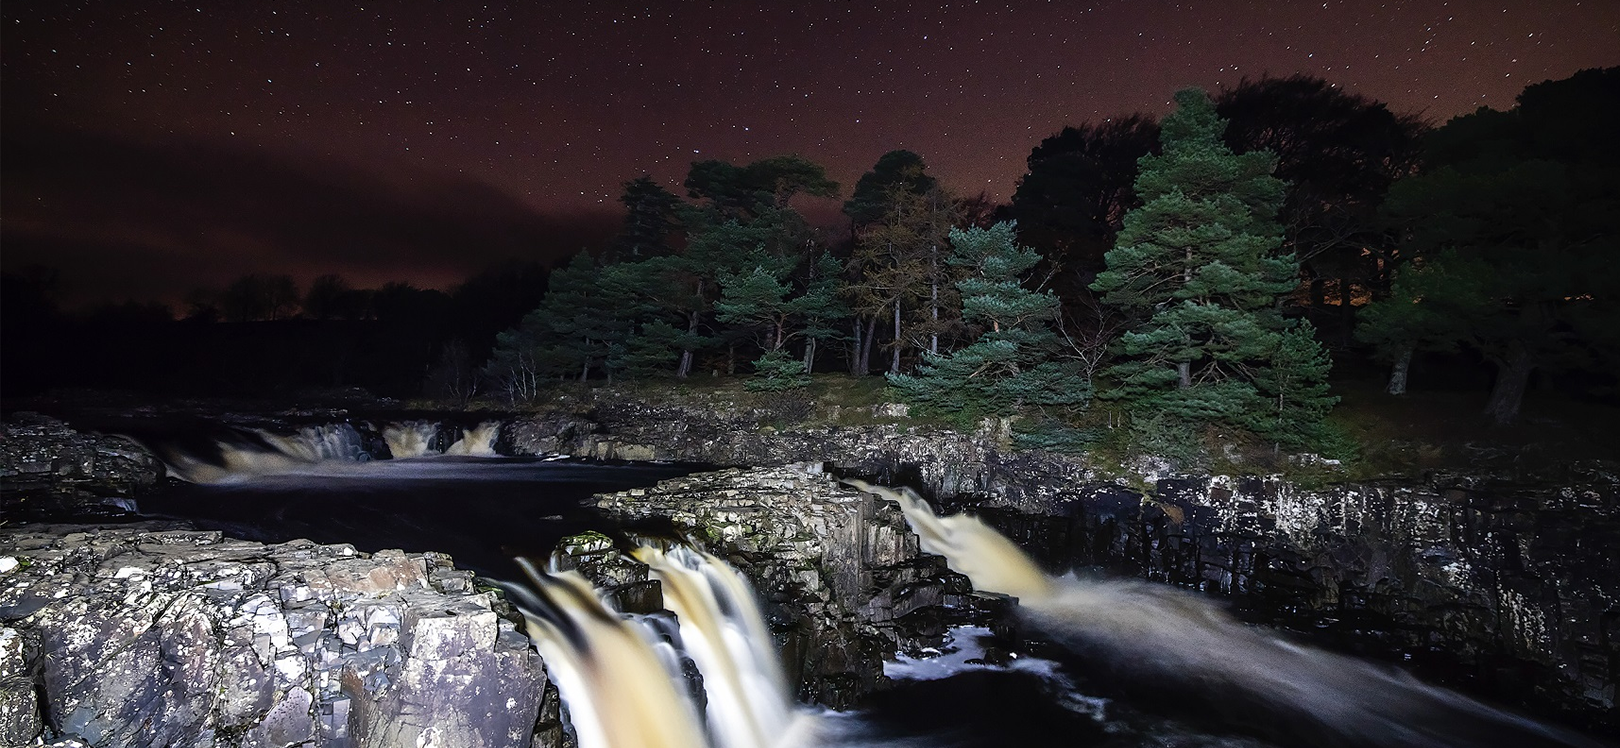 Low Force at night featuring stars